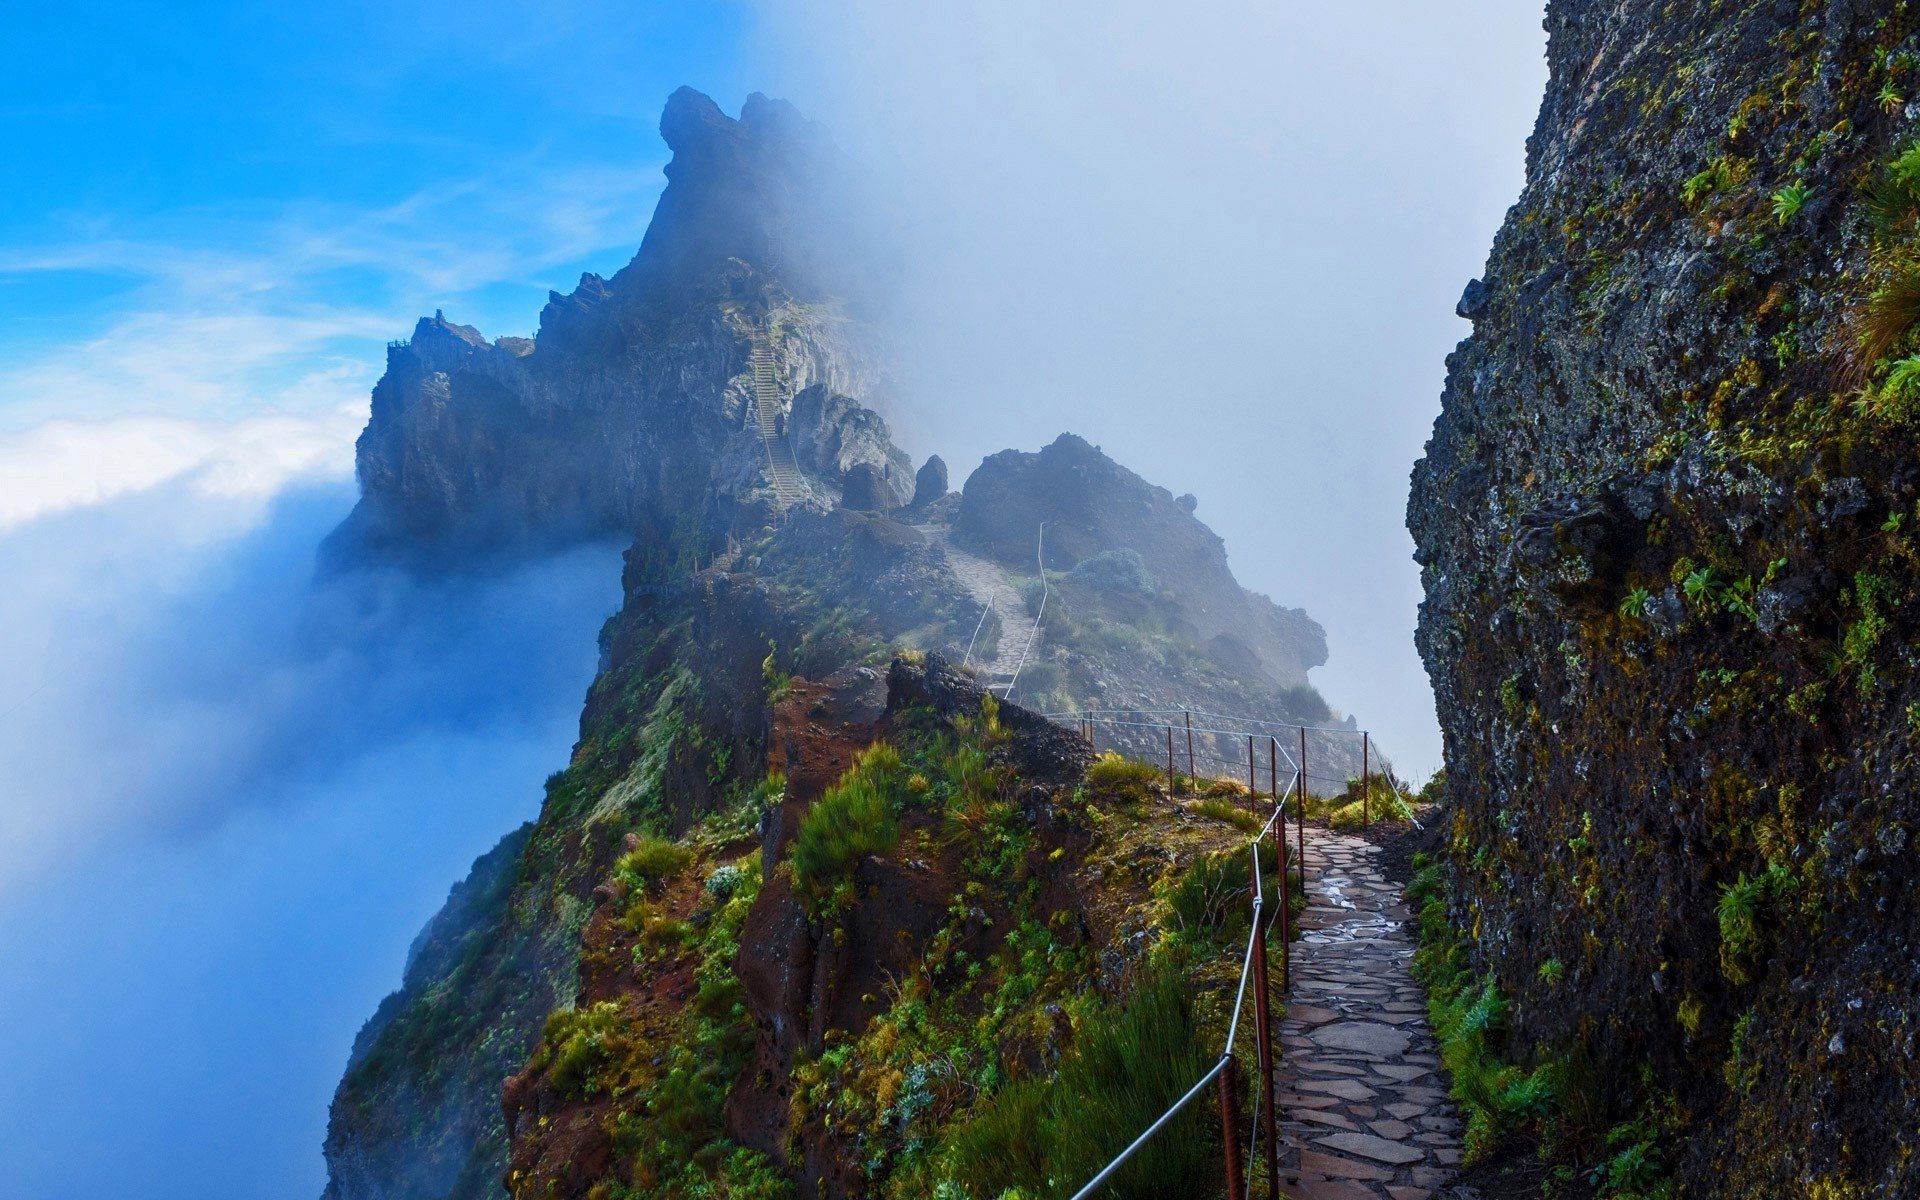 Mountain Trail In Madeira Portugal Man Made Path